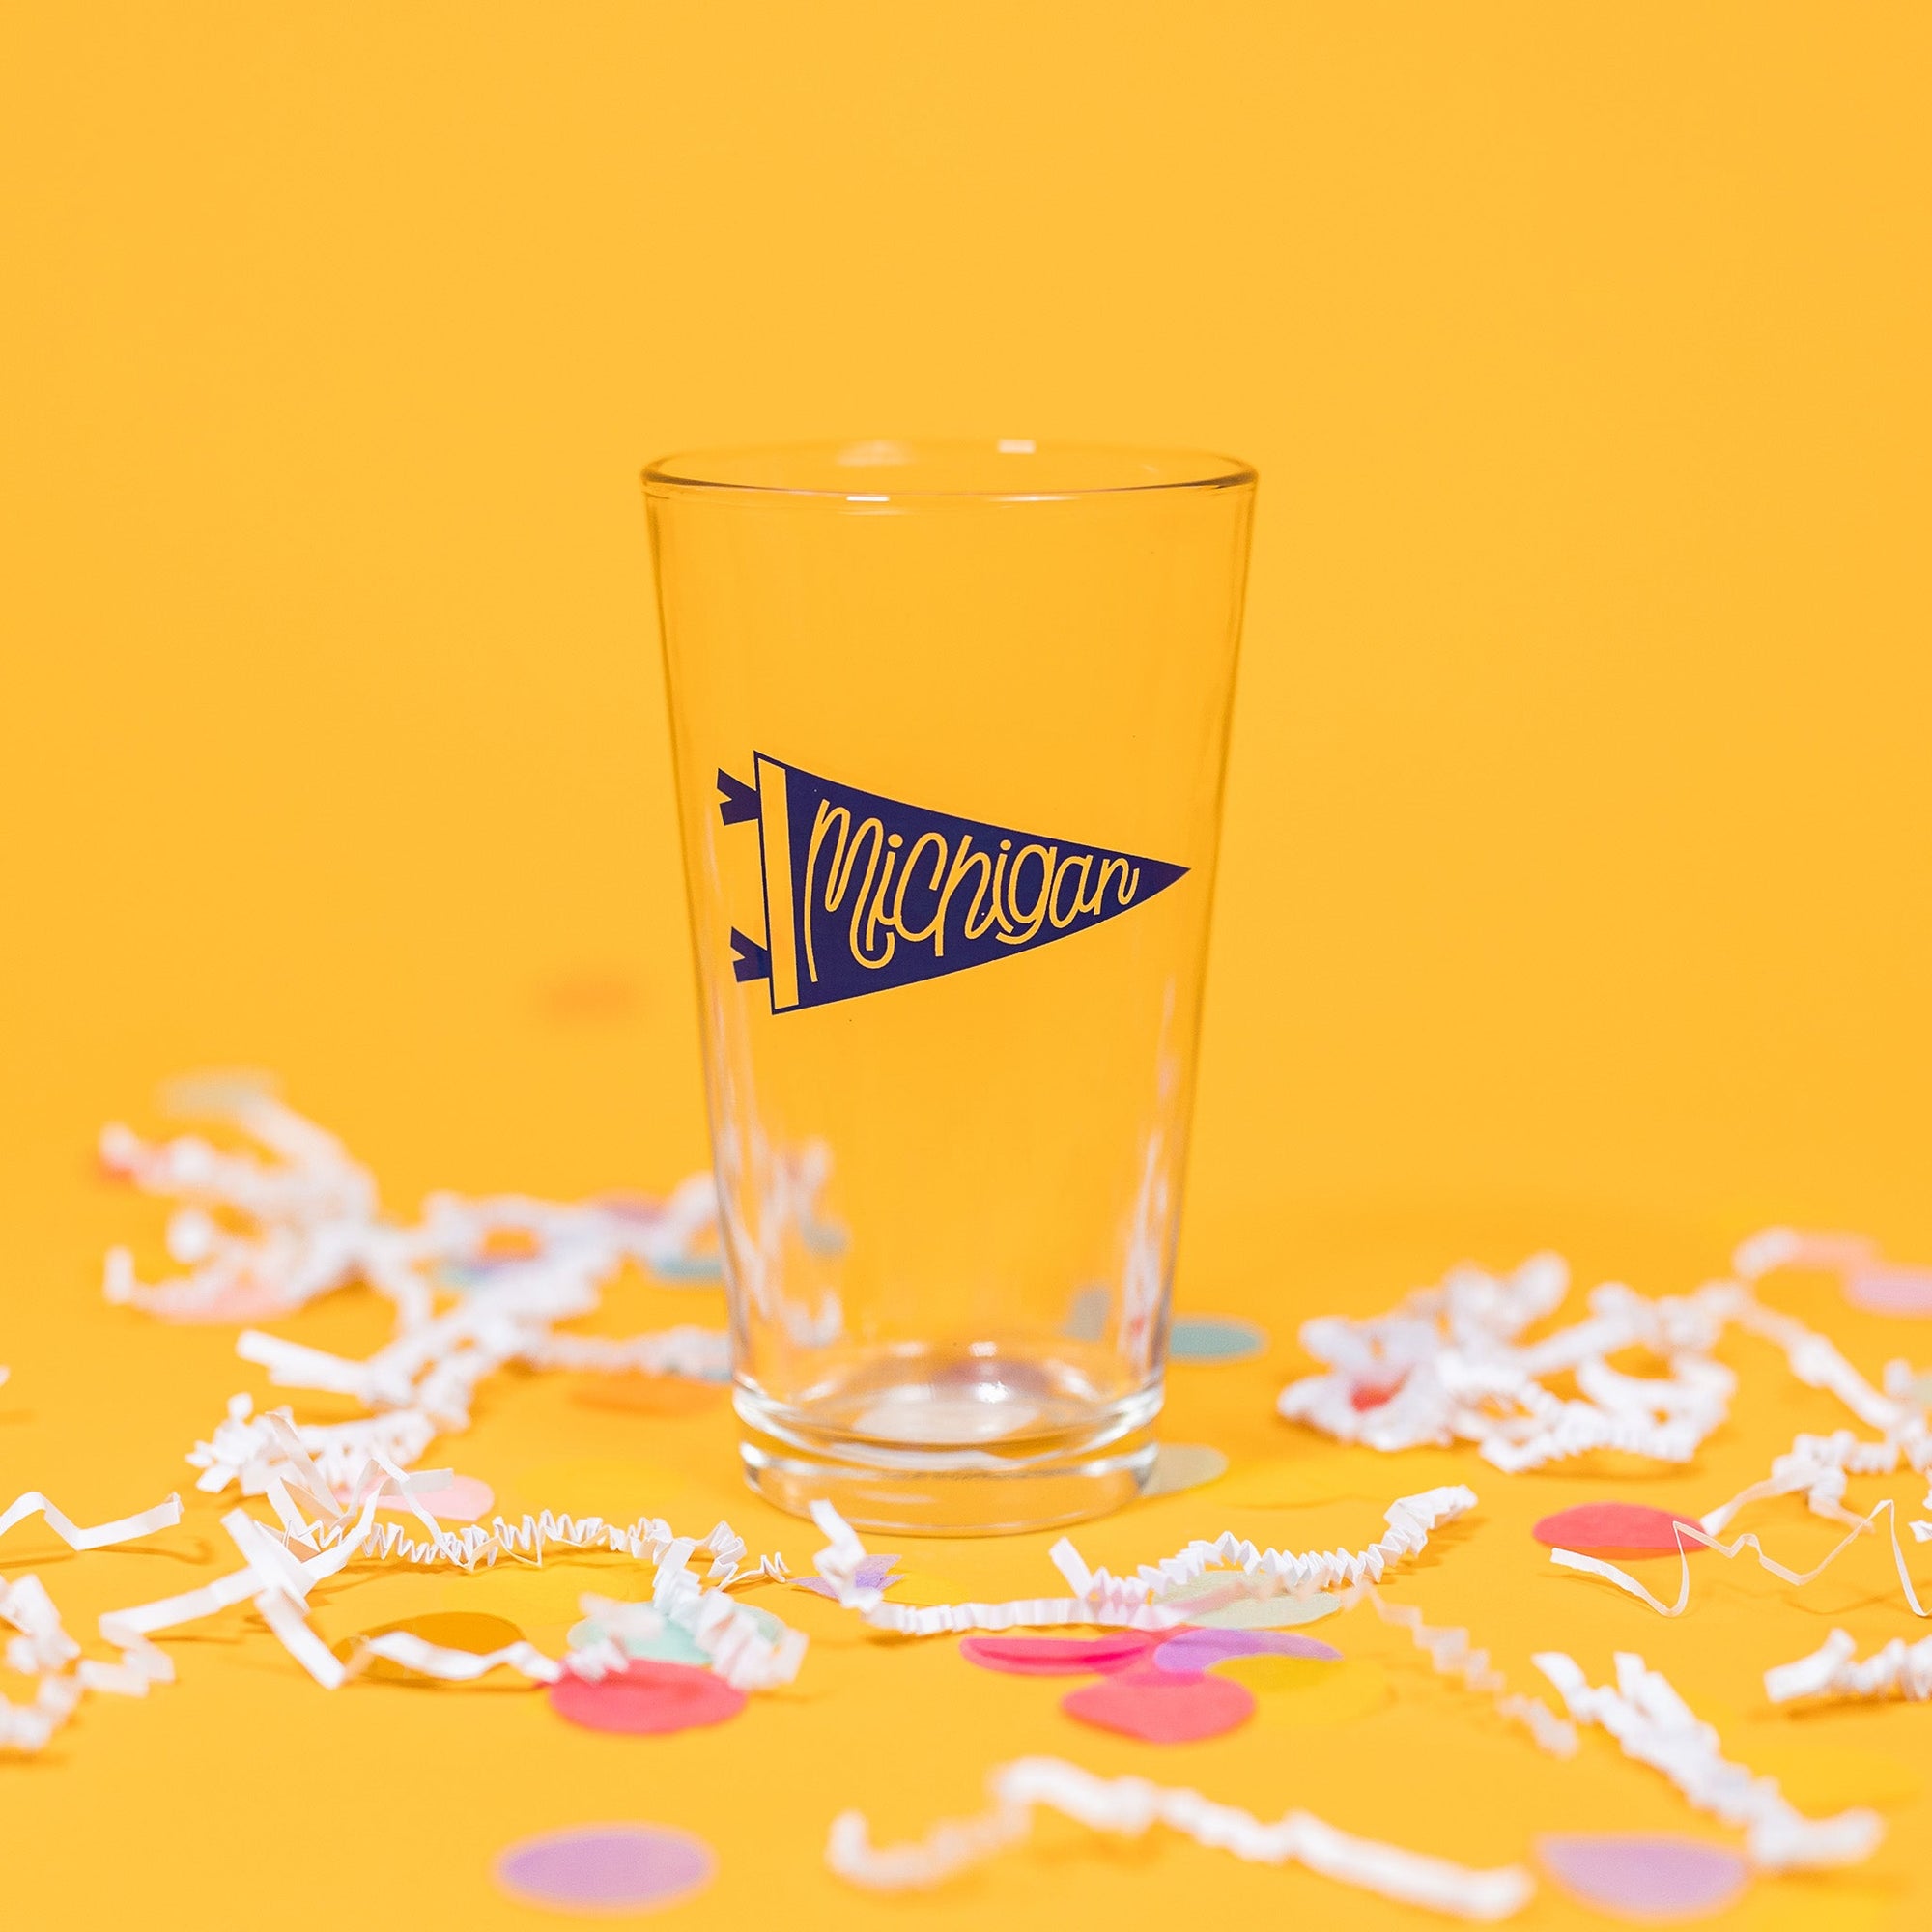 On a sunny mustard background sits a pint glass with white crinkle and big, colorful confetti scattered around. This beer pint glass has a blue pennant that says "Michigan" in script hand lettering.